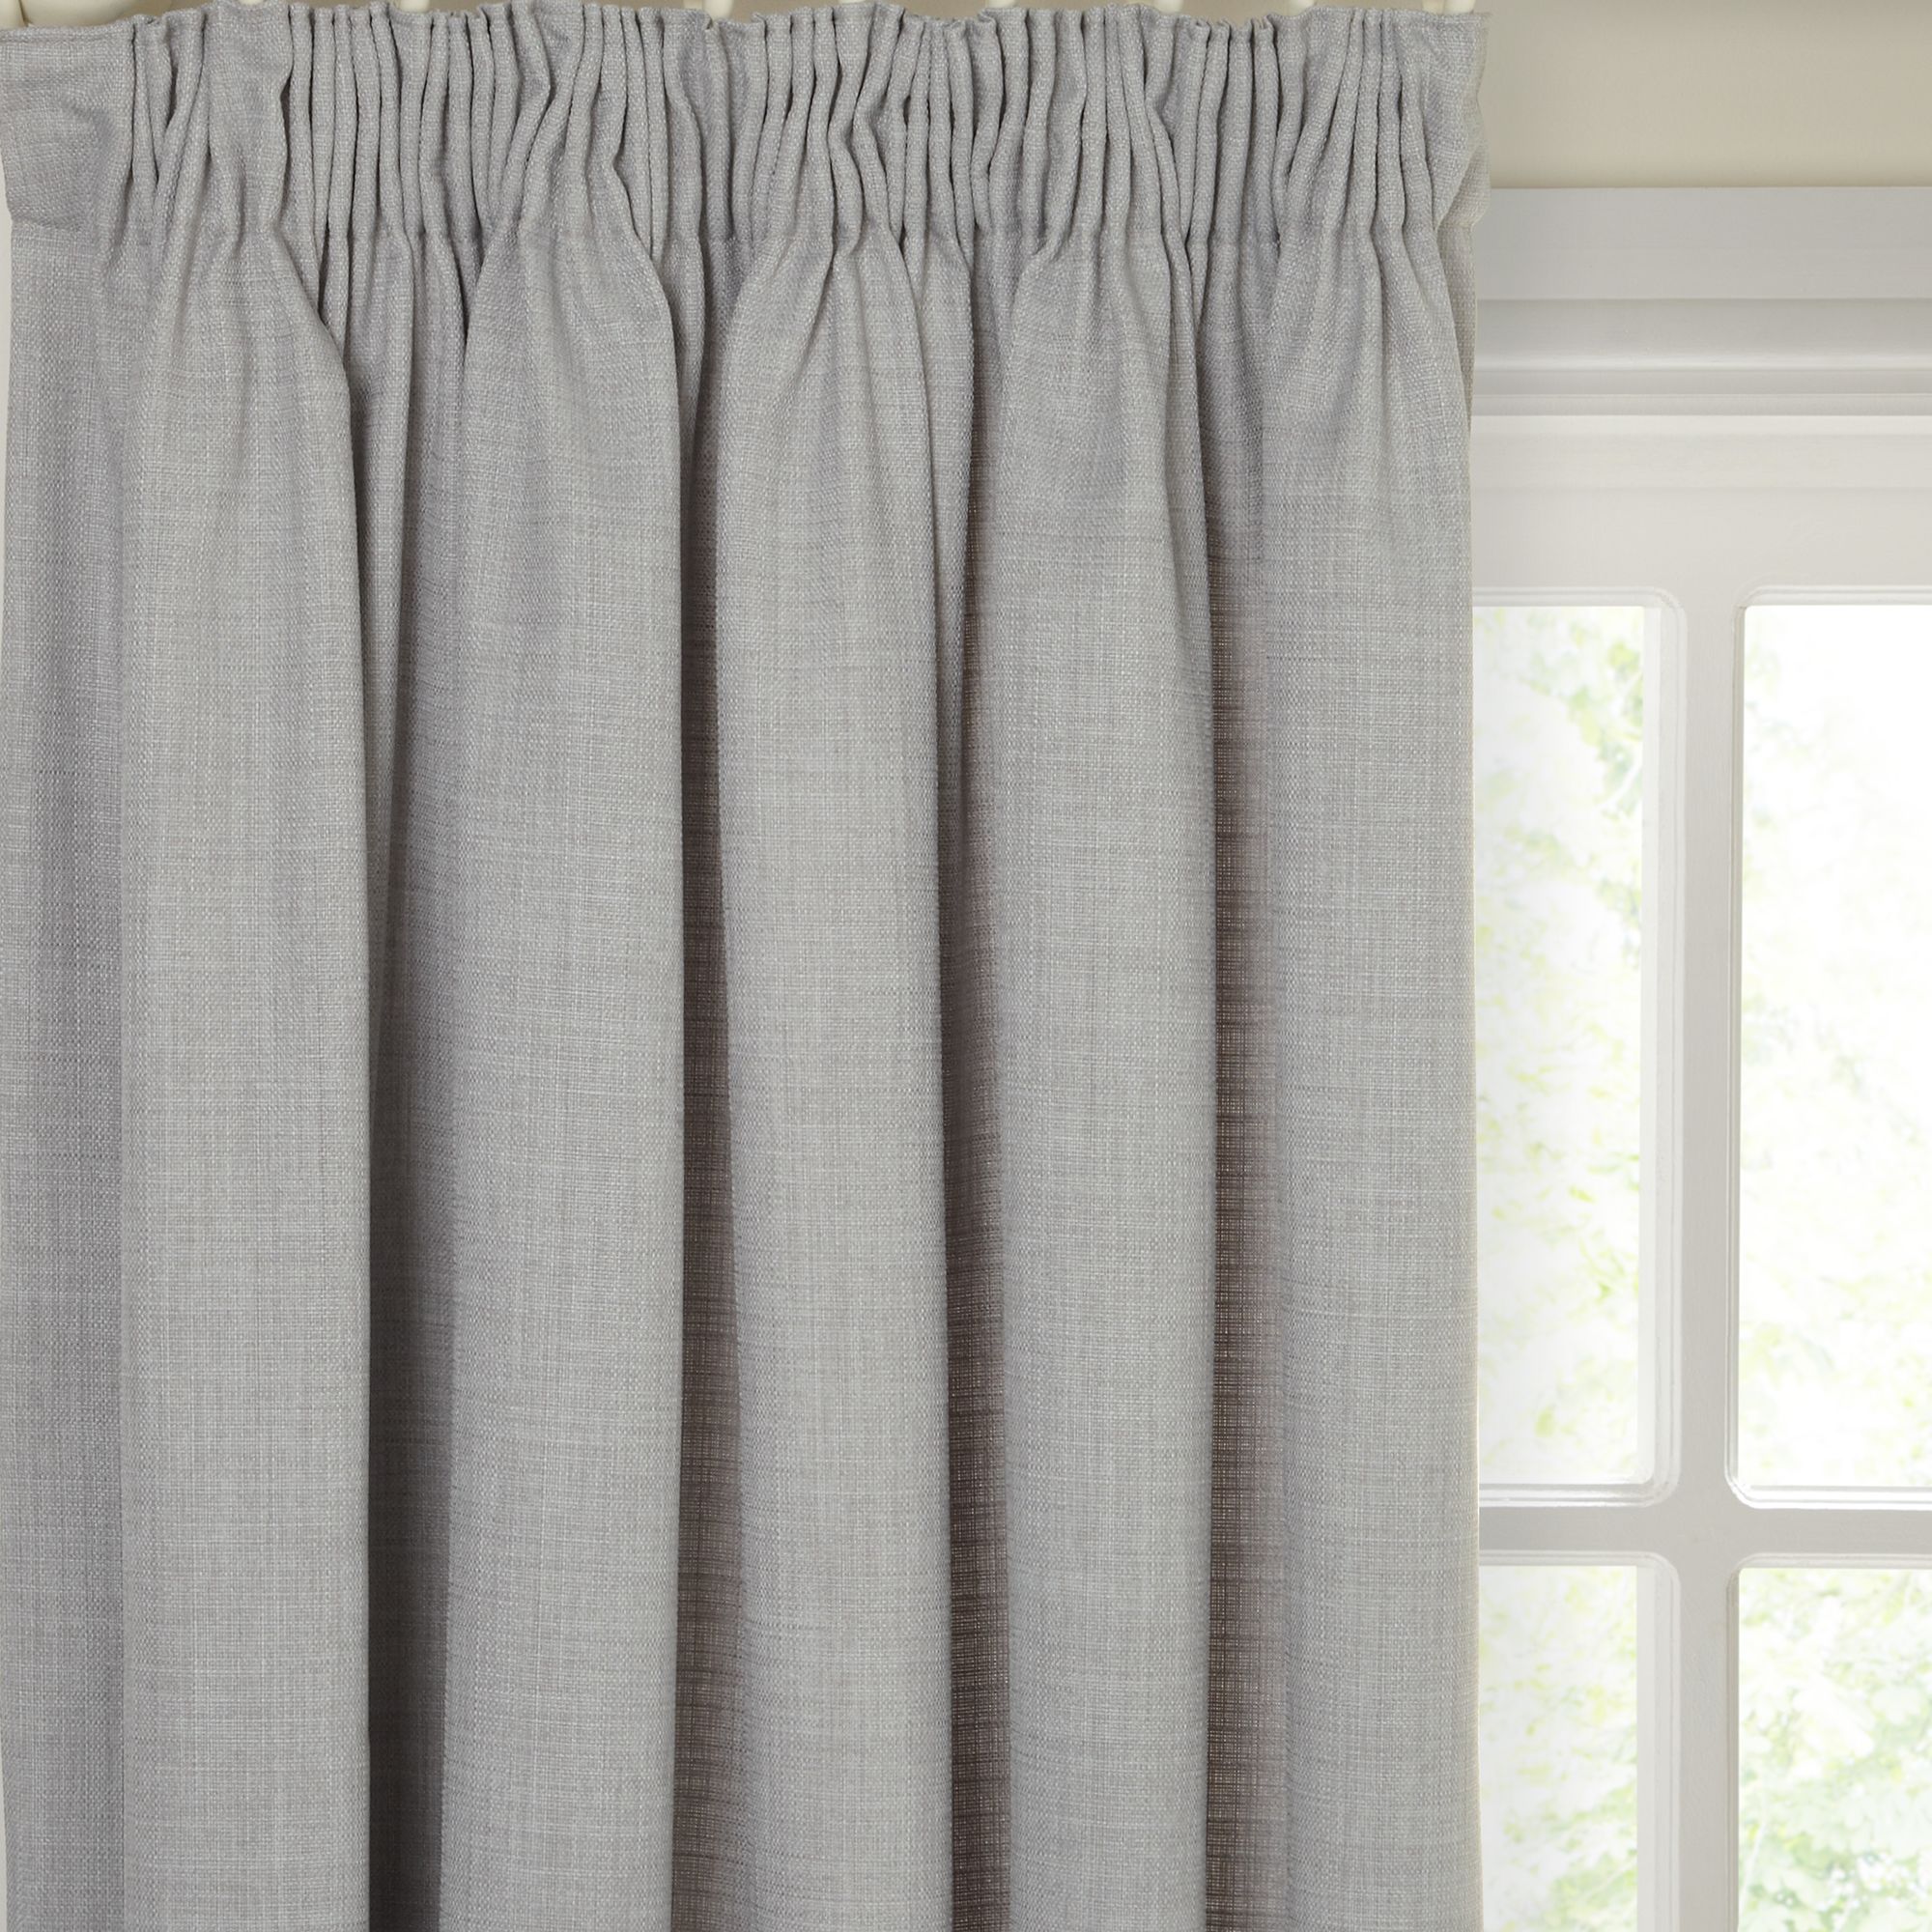 Cheap Thermal Curtains Uk